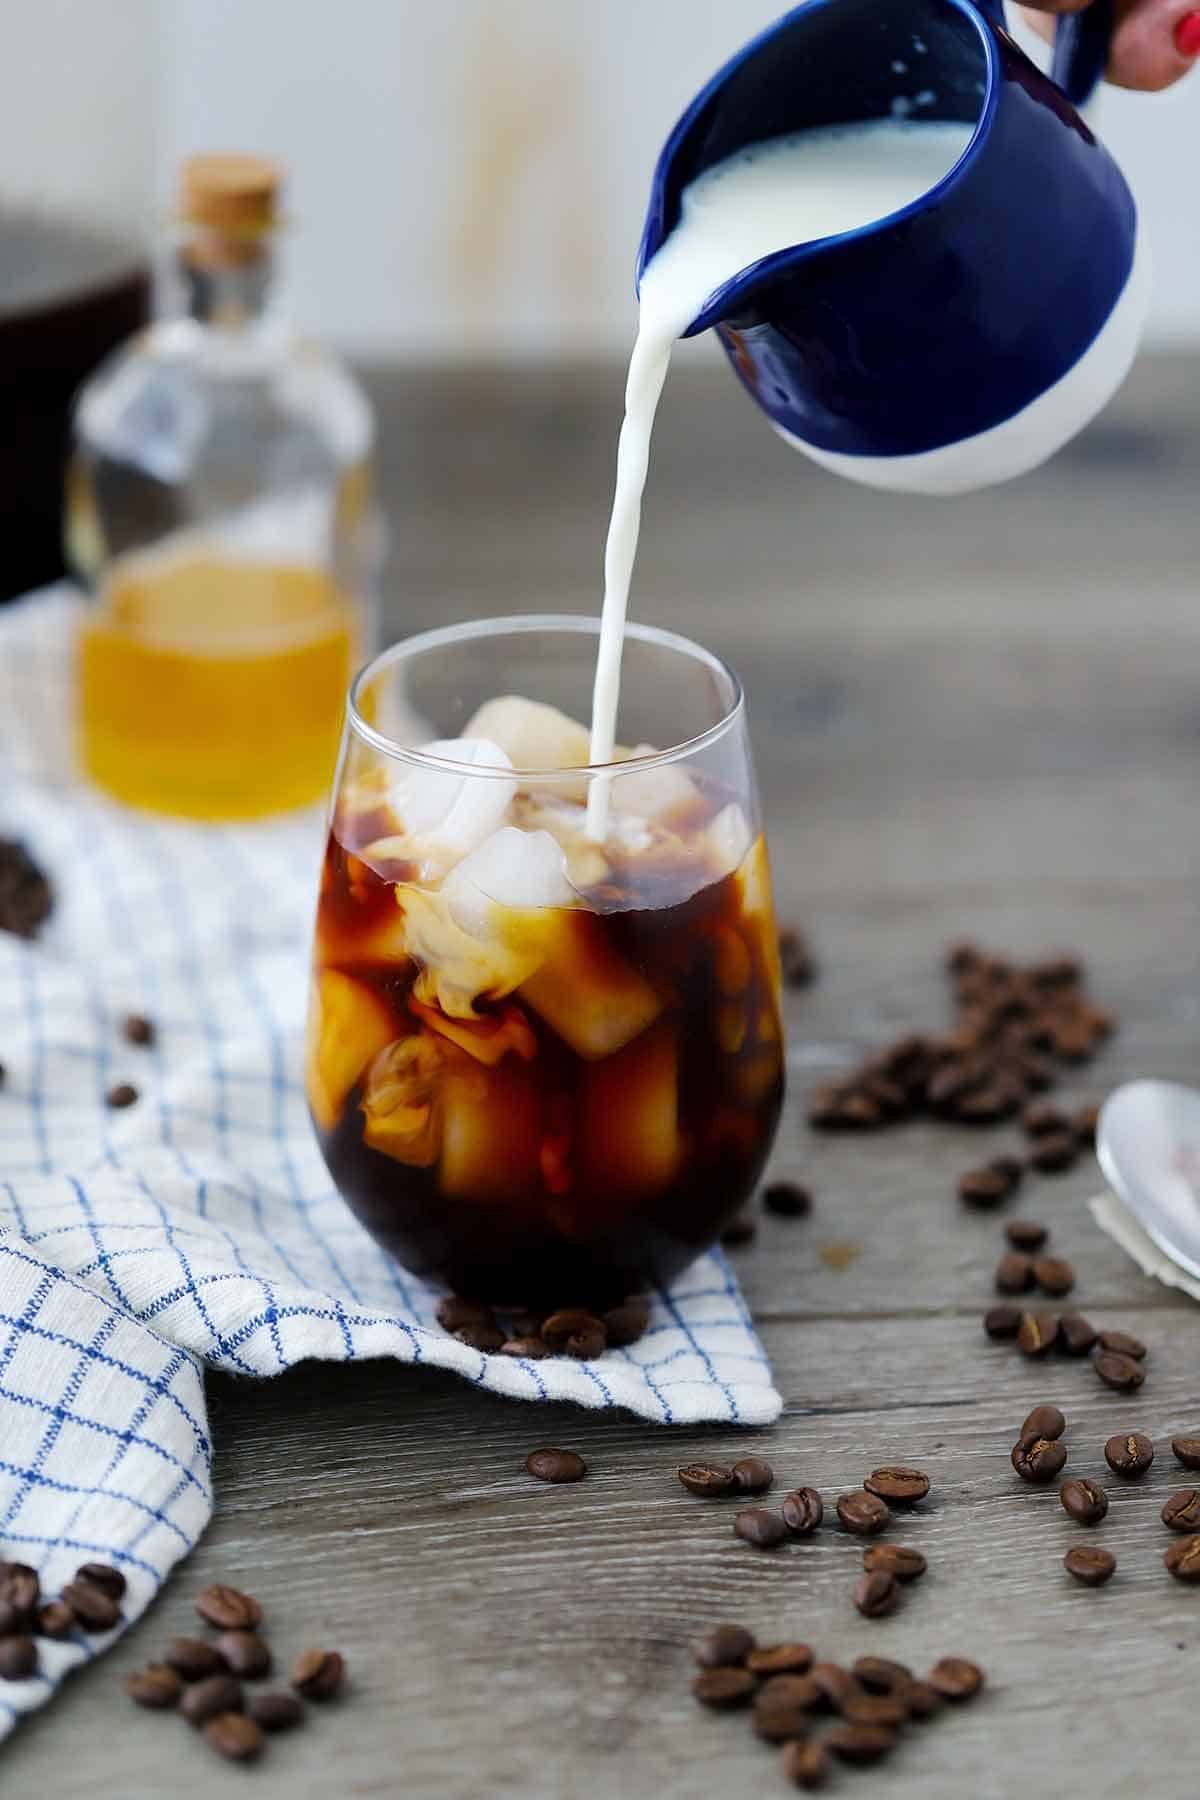 Pouring whole milk into an iced coffee.